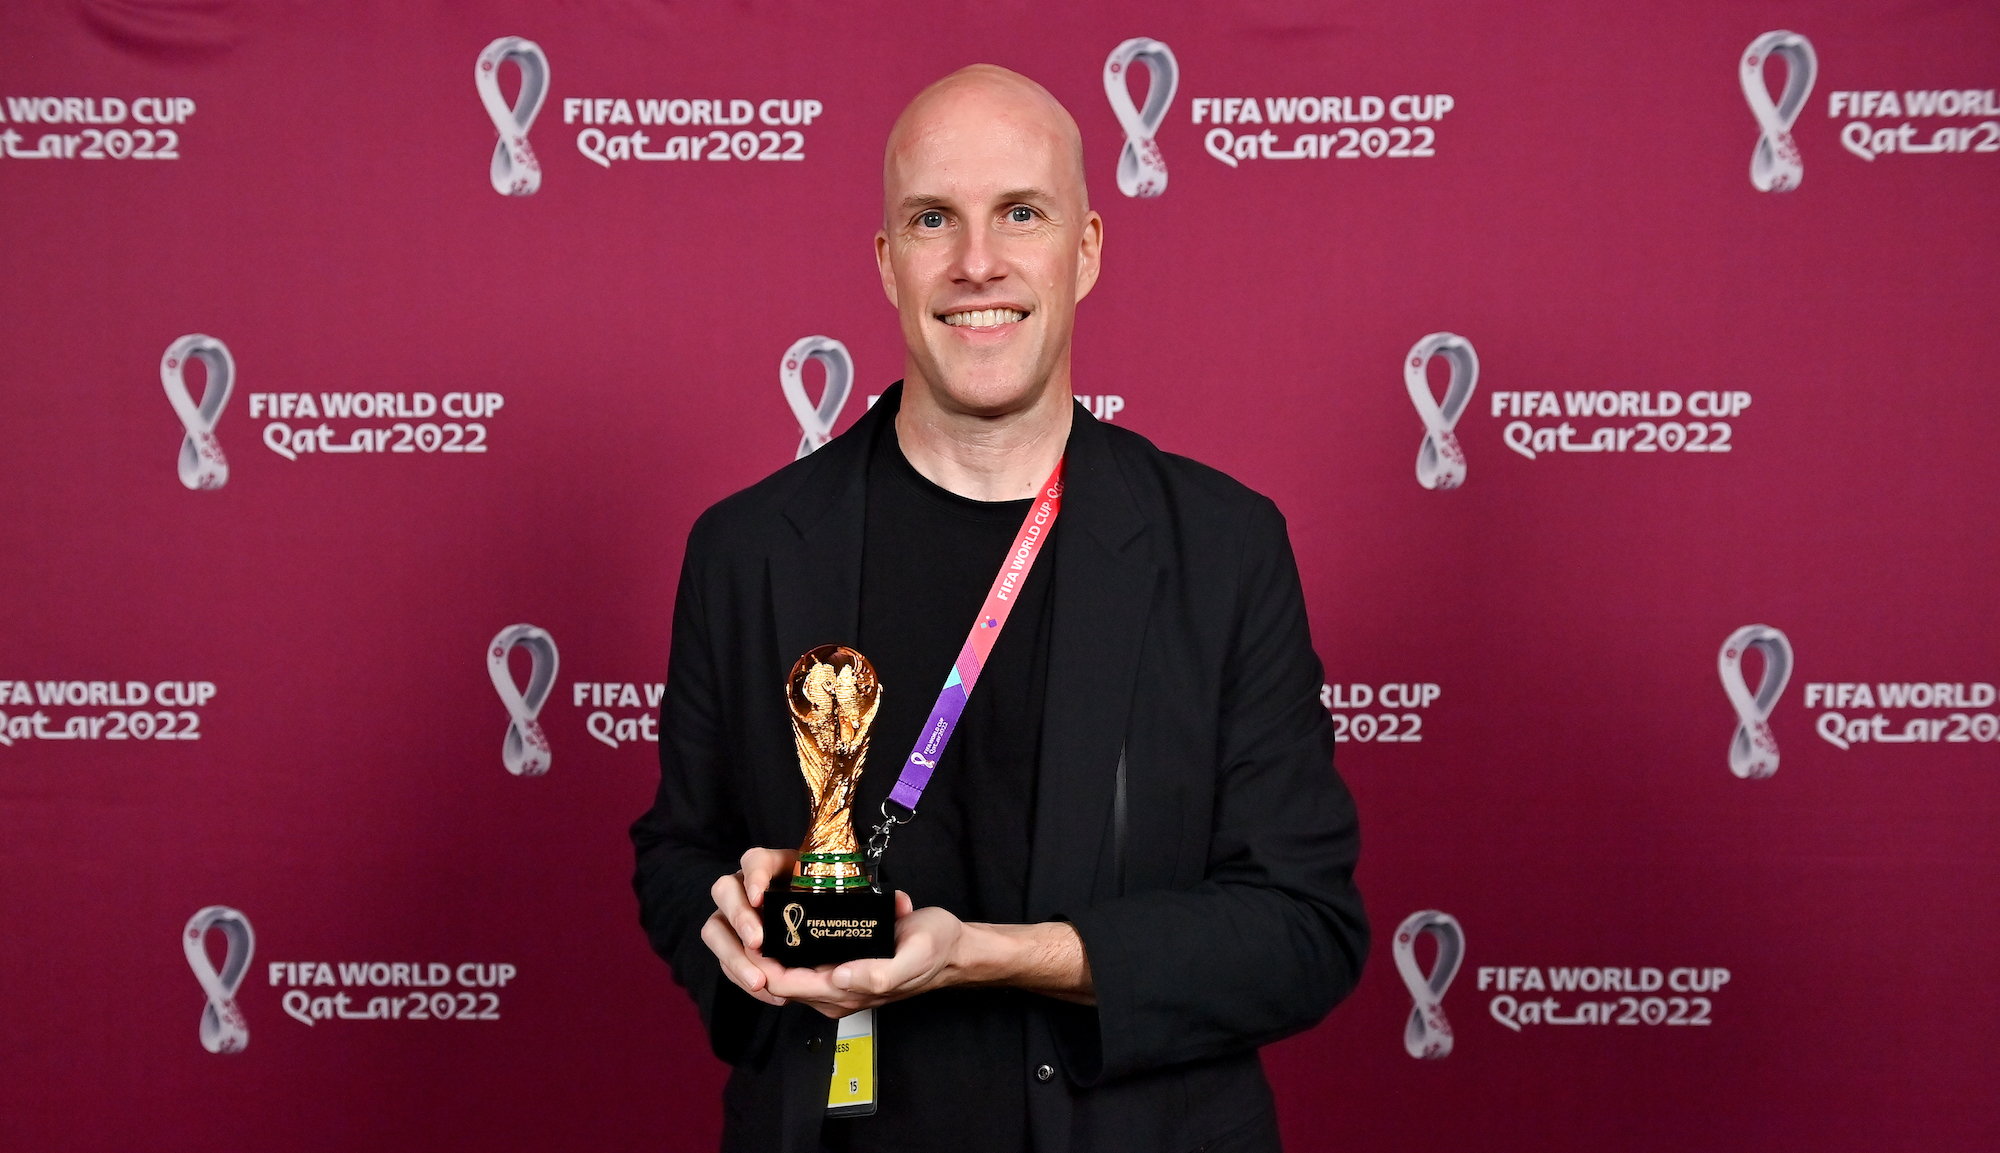 Grant Wahl with a world cup replica trophy, in recognition of their achievement of covering 8 or more FIFA World Cups, during an AIPS / FIFA Journalist on the Podium ceremony at the Main Media Centre on November 29, 2022 in Doha, Qatar.